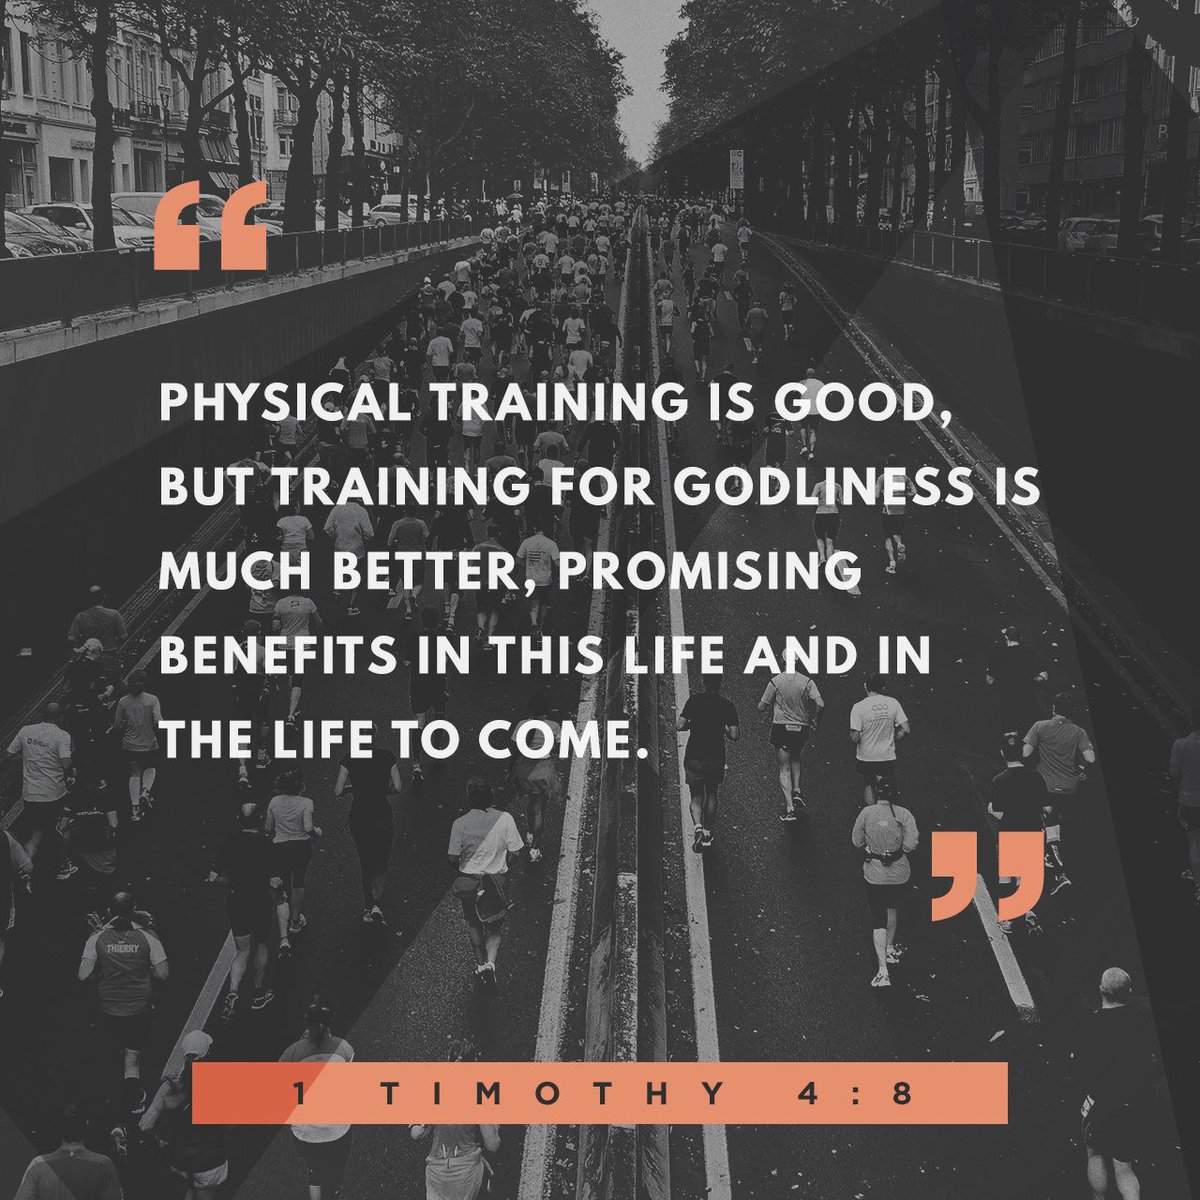 Isaiah's Insight-2/23:
Godly training outweights physical training for now and life eternal. #Train4God. #1Tim4v8.